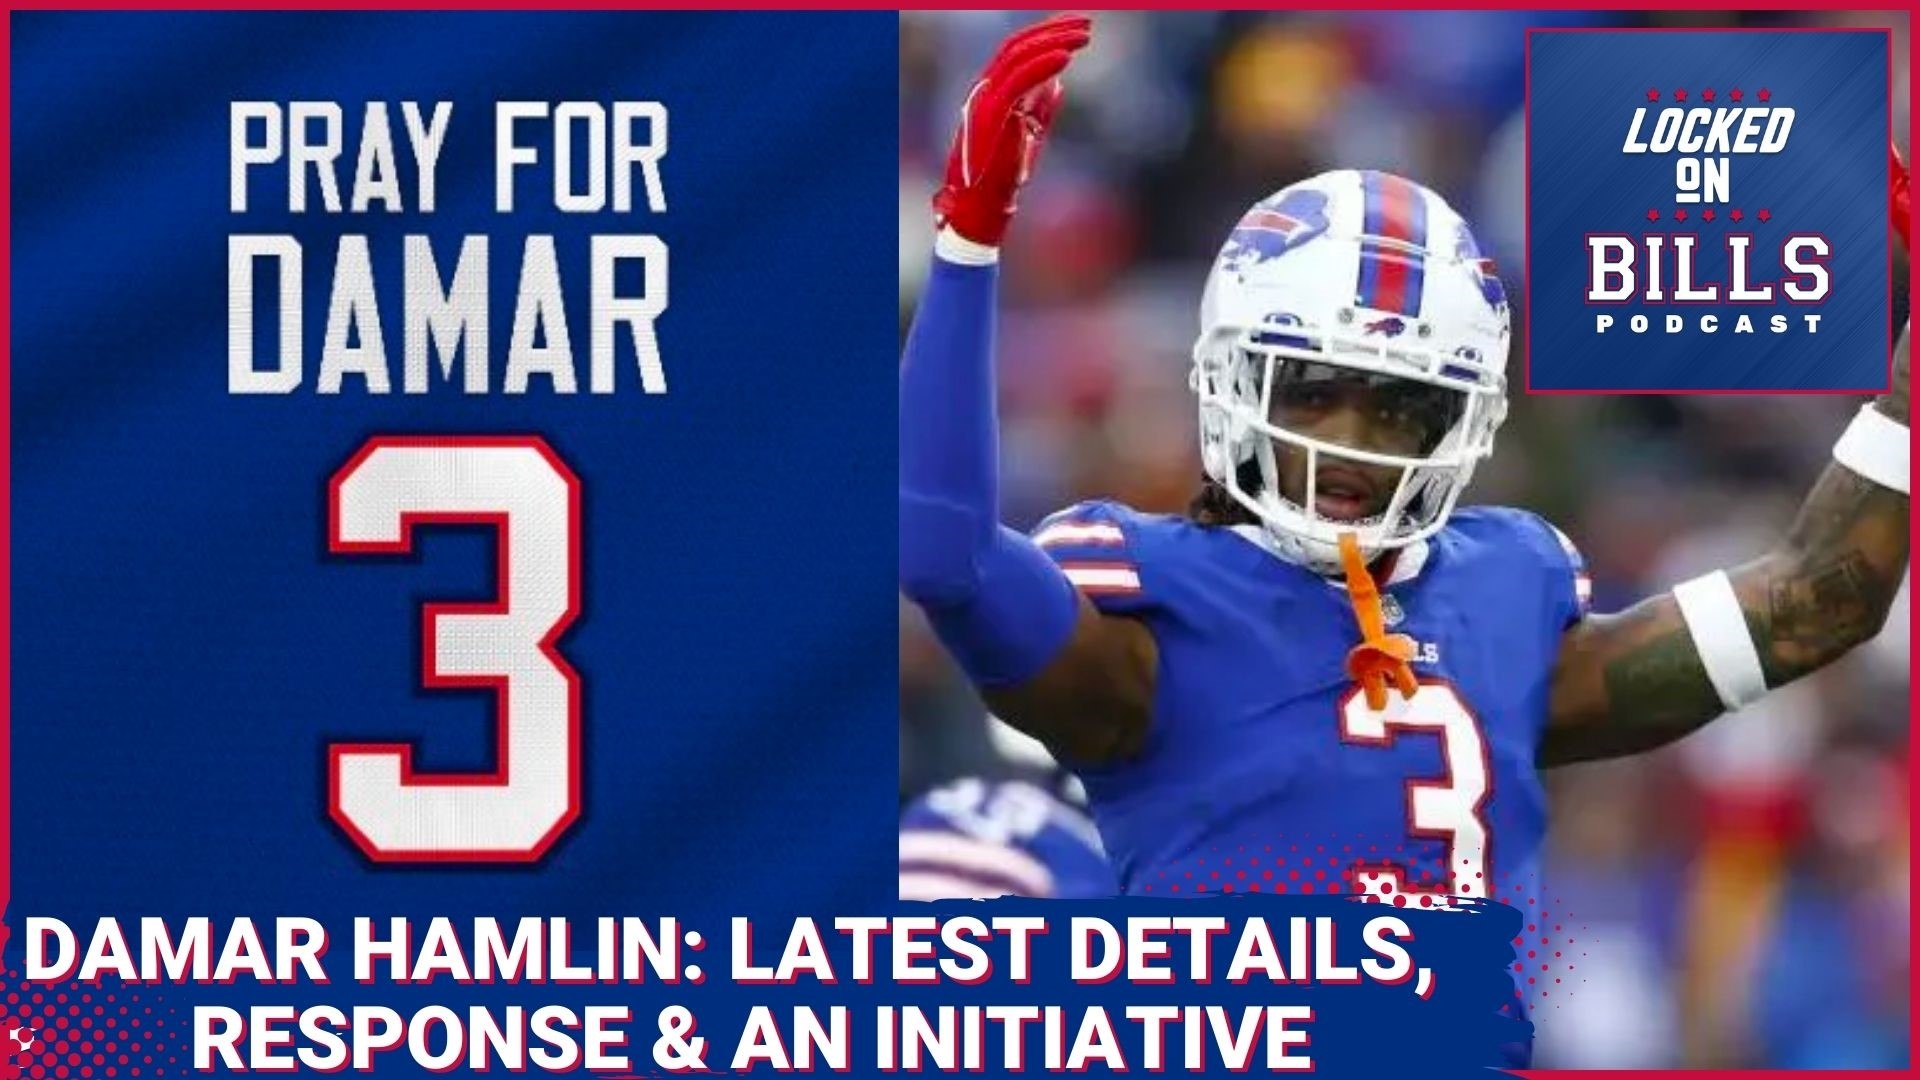 Joe Marino discusses what we've learned regarding the Buffalo Bills and Damar Hamlin's situation, the response and a personal initiative.